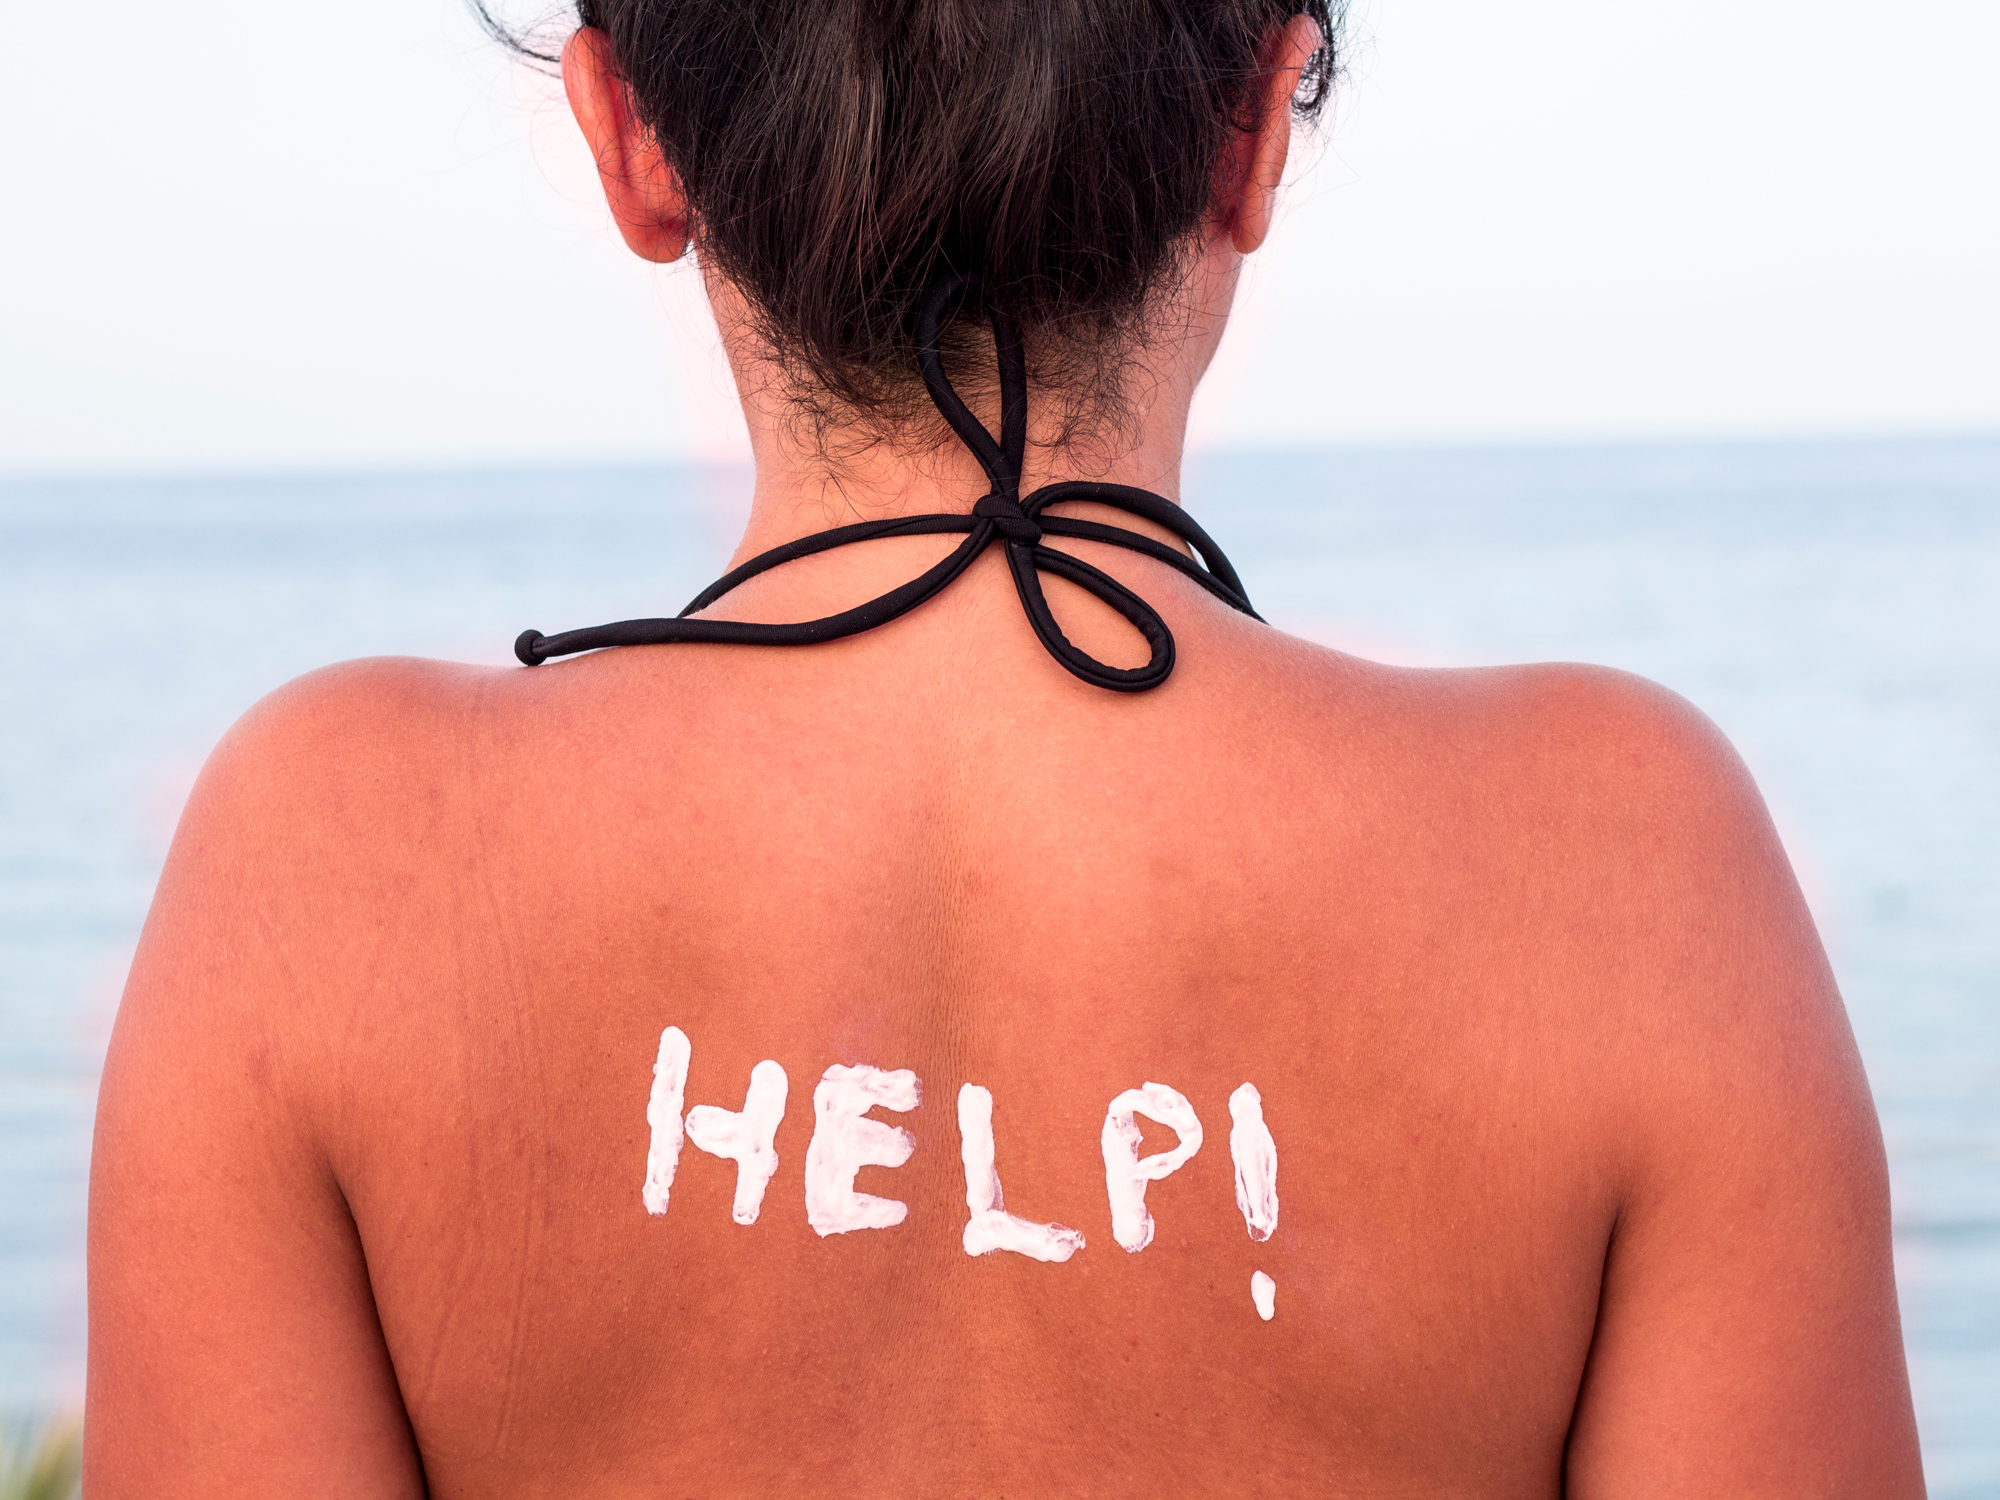 Is any amount of tanning actually safe?